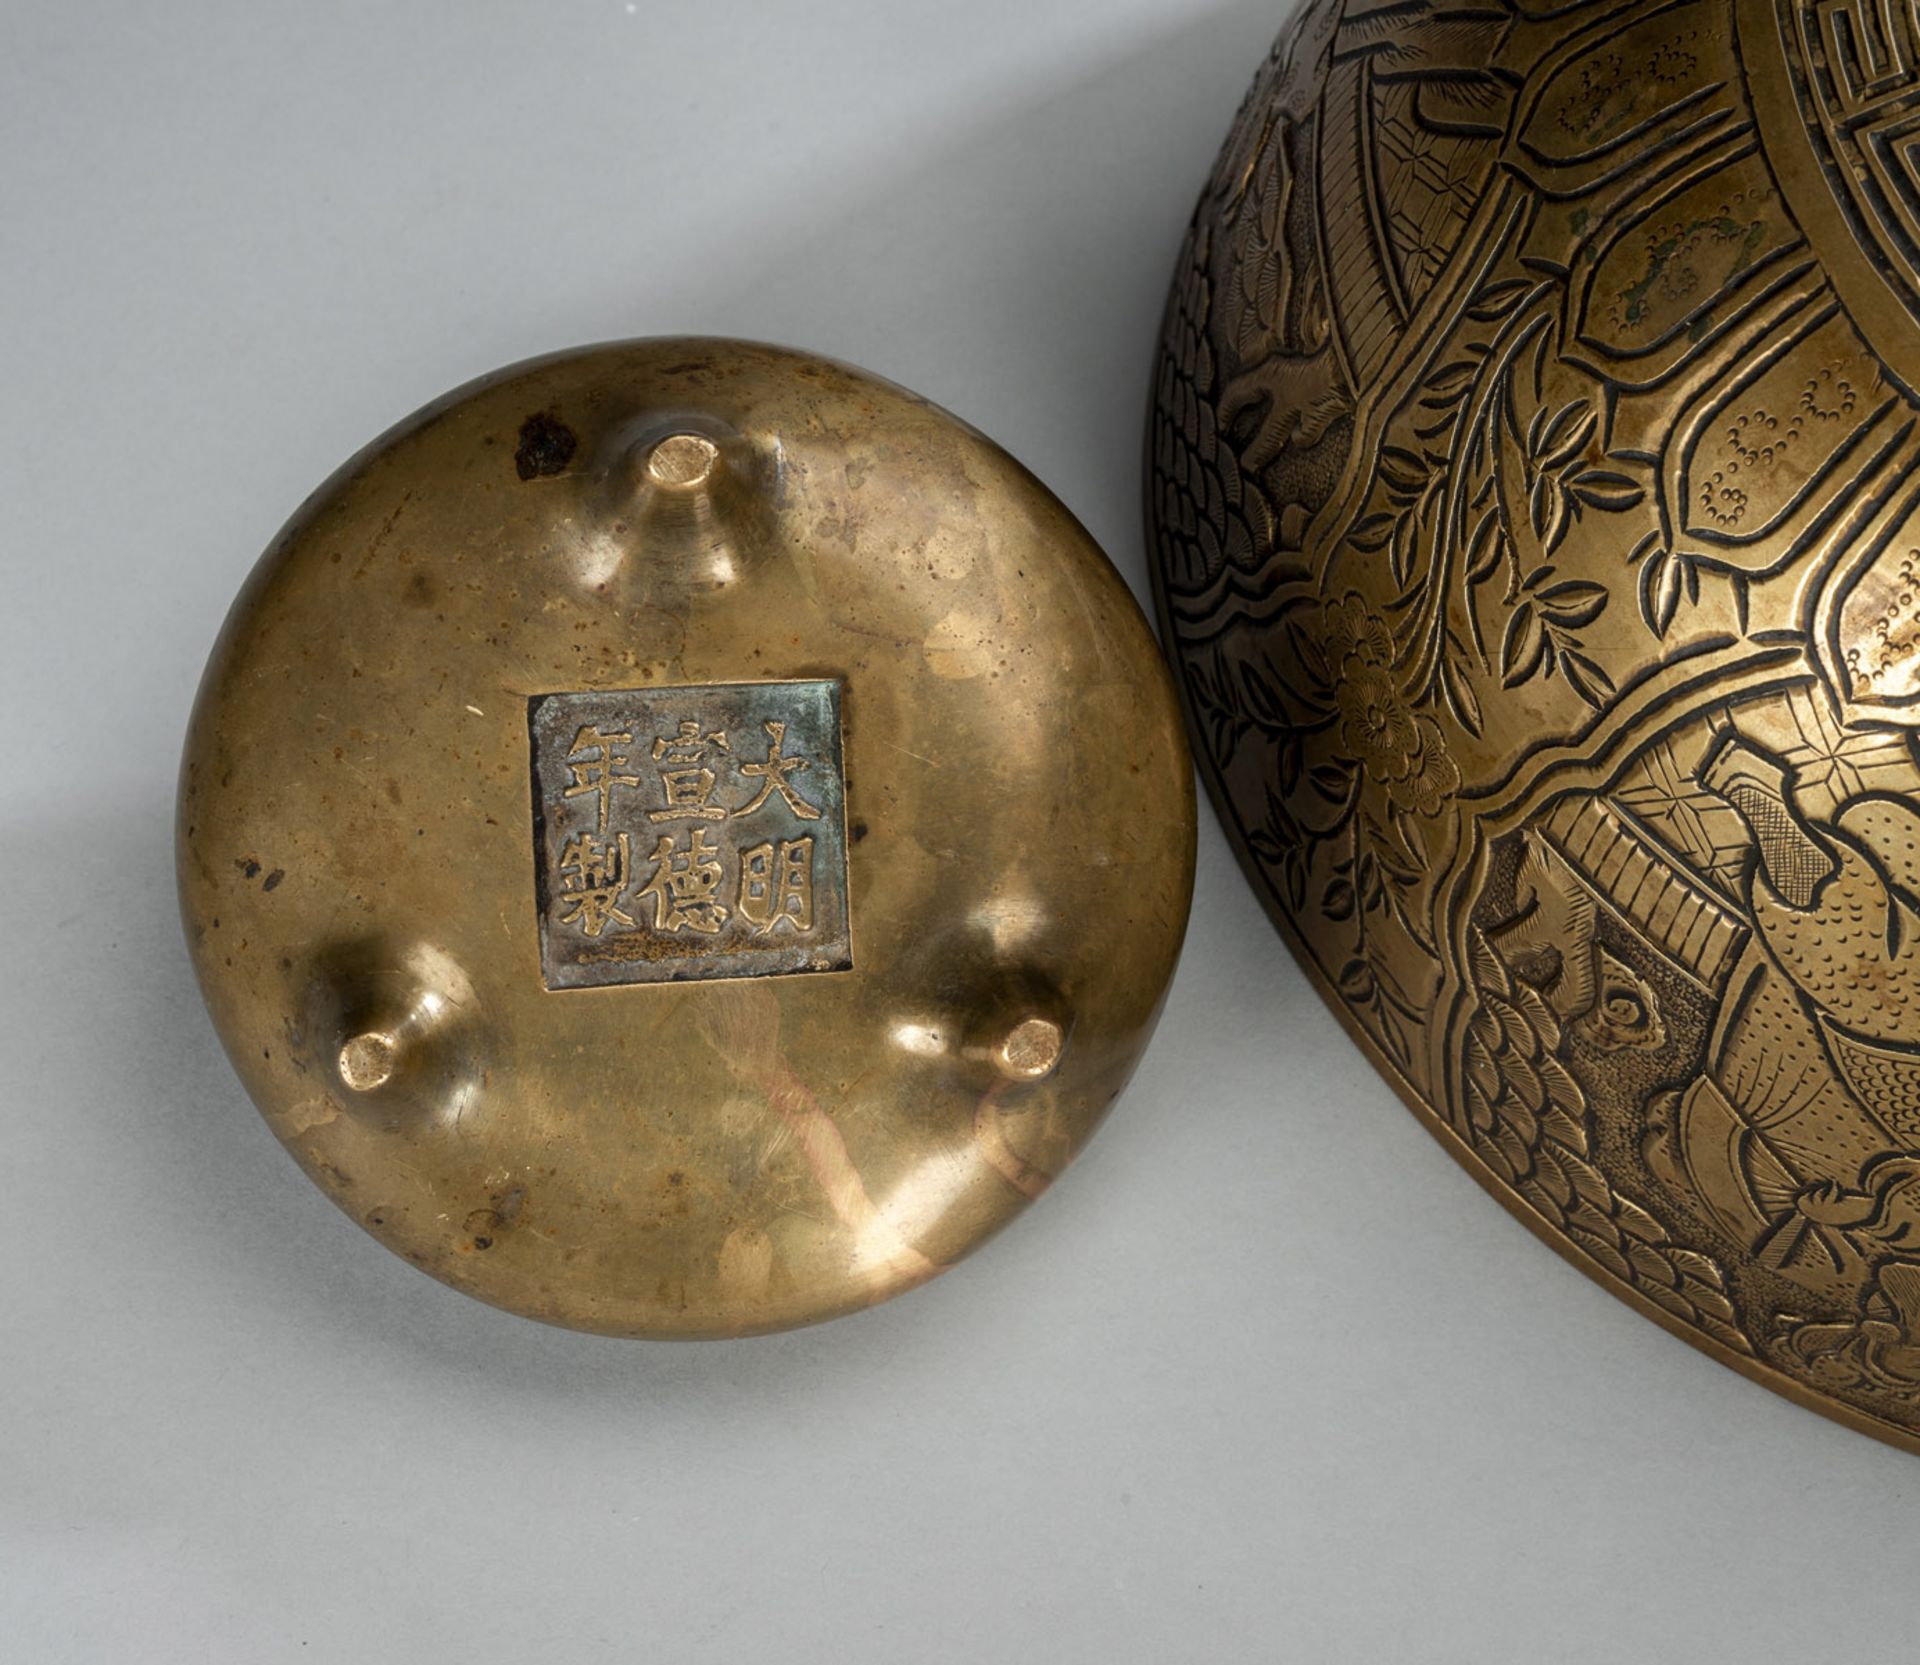 A BRONZE BOWL, A BRONZE INCENSE AND A BAMBOO BRUSH POT WITH A LAKE LANDSCAPE IN RELIEF - Image 4 of 6